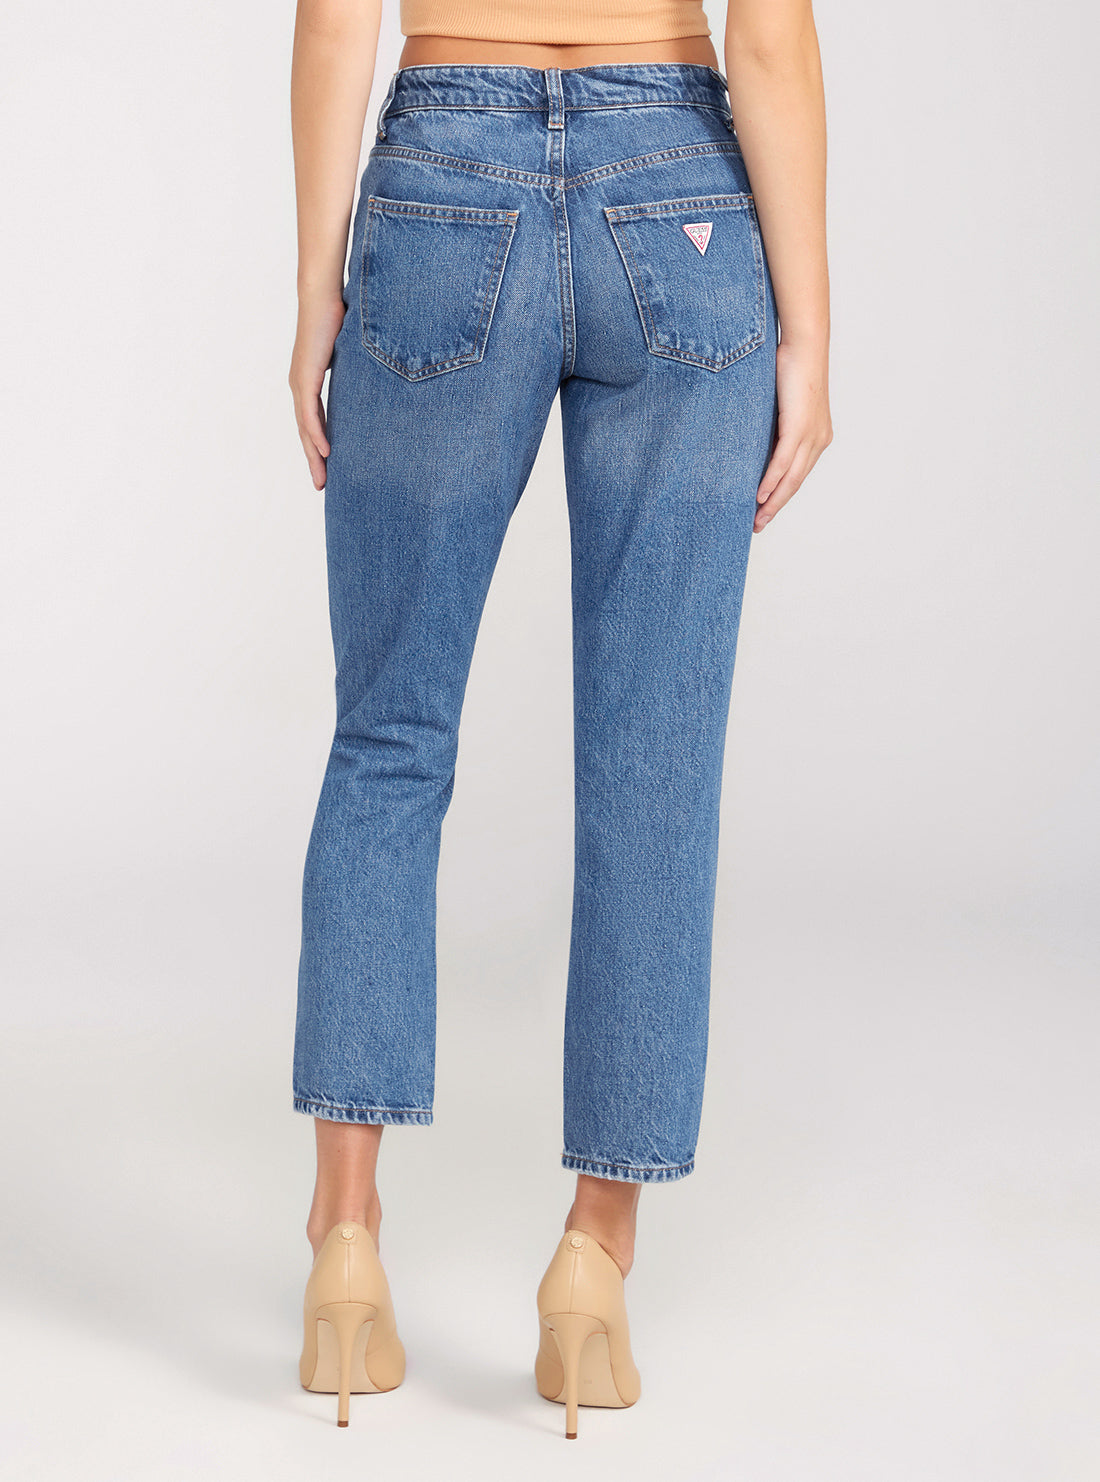 GUESS Mid-Rise Ripped Cropped It Girl Jeans In Medium Wash back view